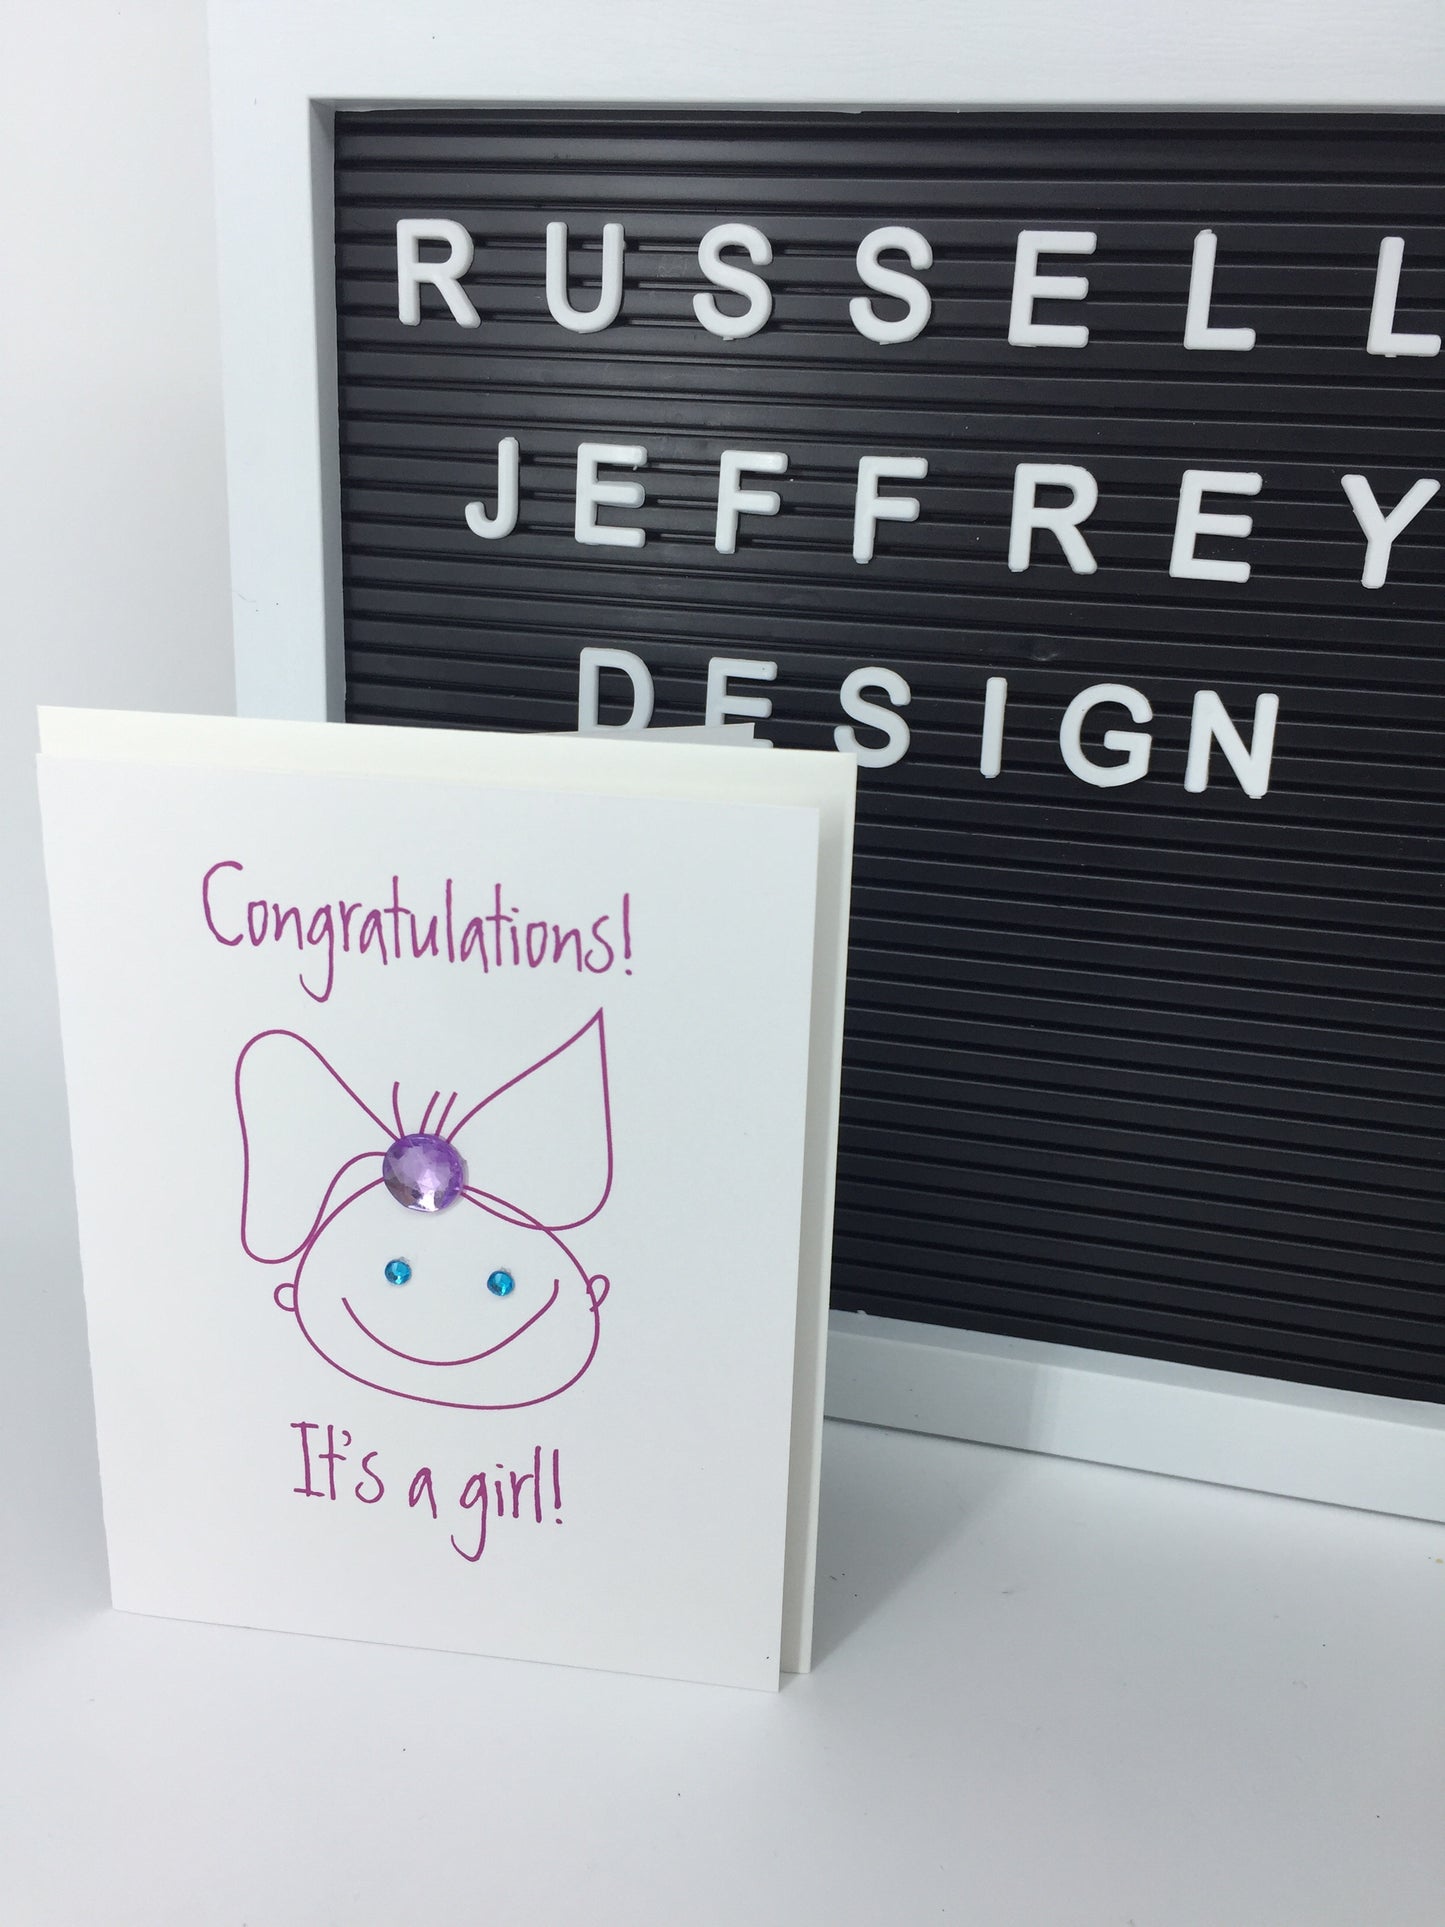 Congratulations! It's a Girl! Greeting Card